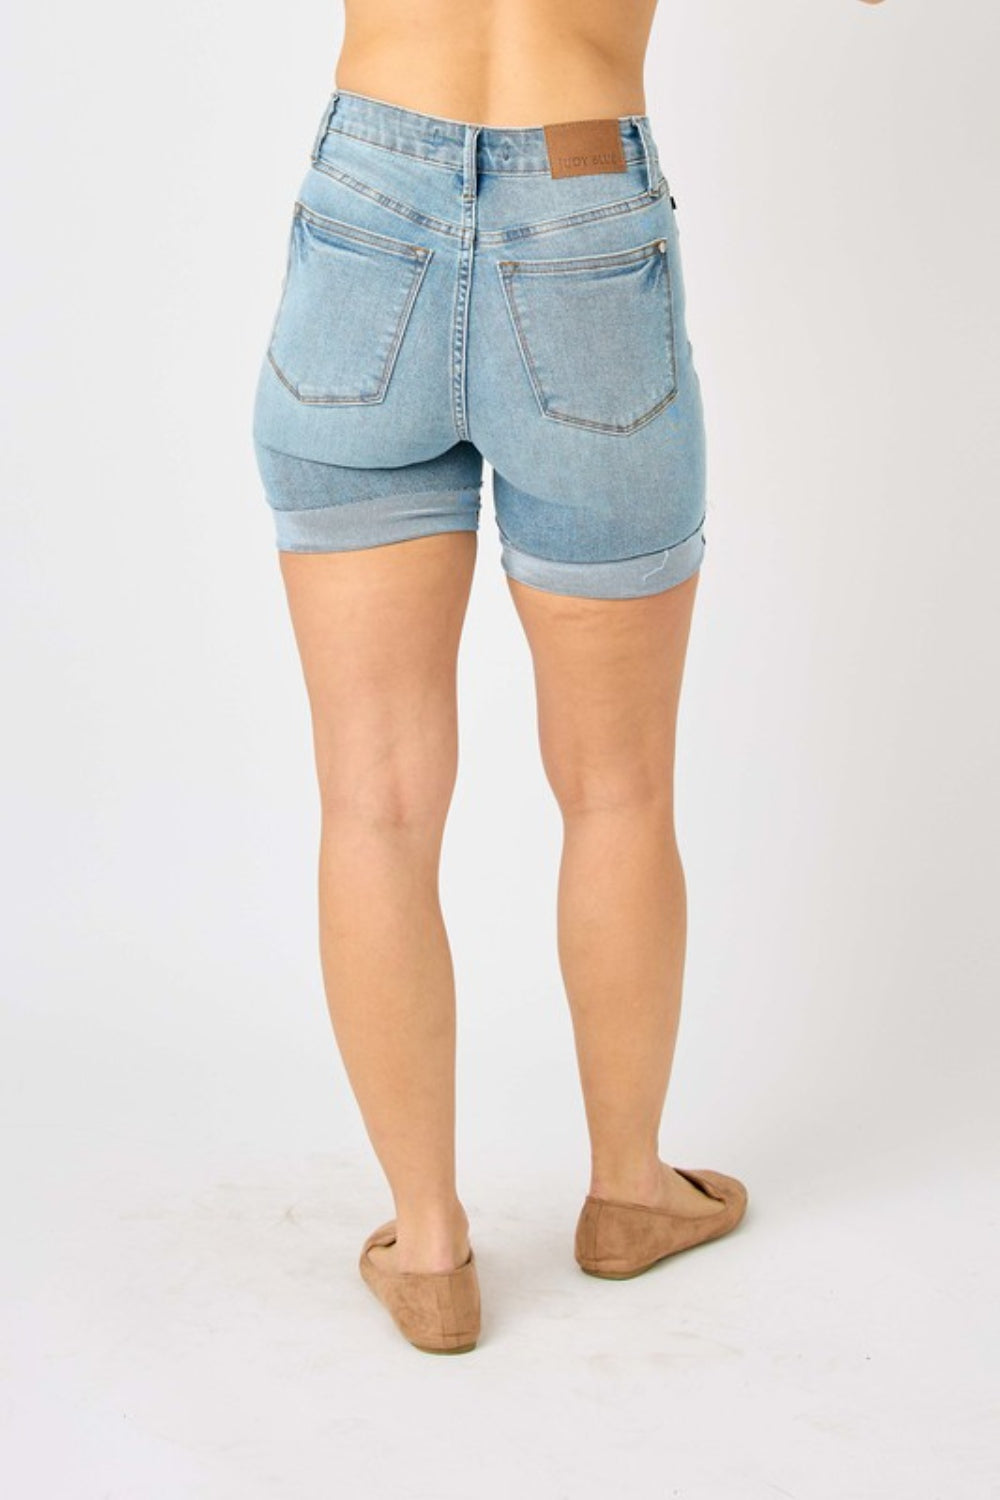 Achieve a flattering and stylish look with these tummy control denim shorts, designed to provide comfort and confidence. The tummy control feature helps smooth and shape your midsection, allowing you to feel great in these shorts. Made from denim fabric, these shorts offer a classic and versatile style that can be dressed up or down. S  - 4X